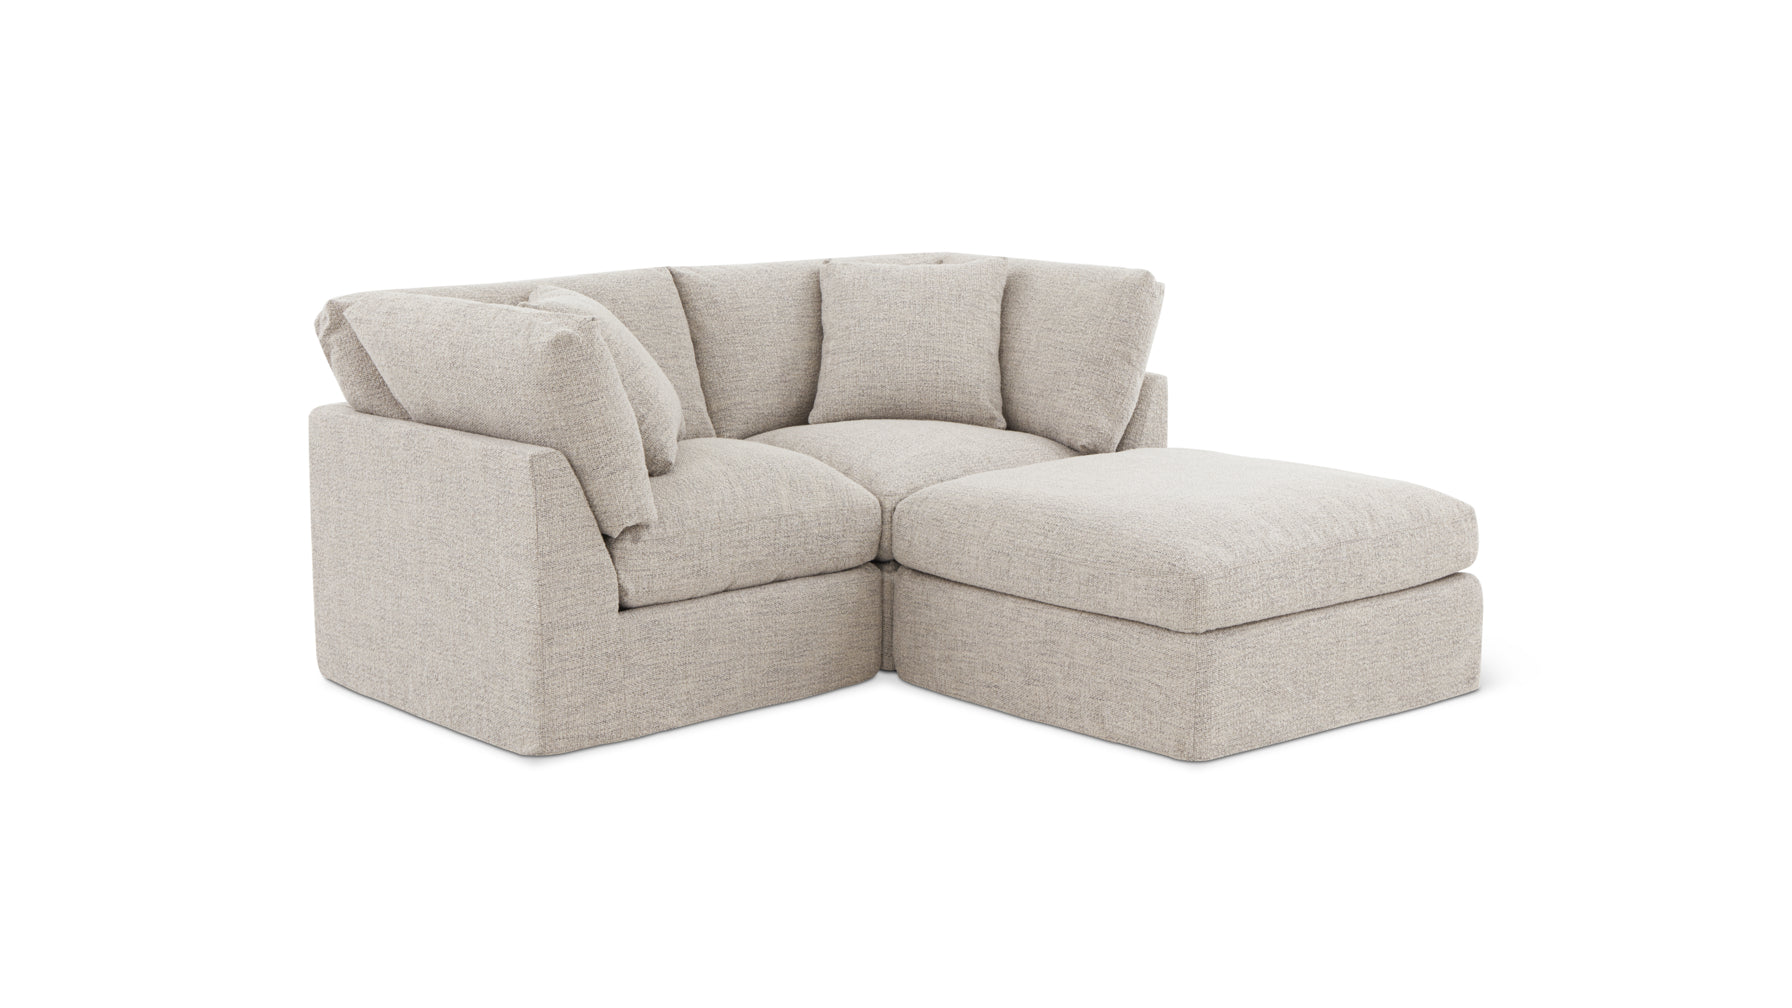 Get Together™ 3-Piece Modular Sectional, Standard, Oatmeal - Image 2